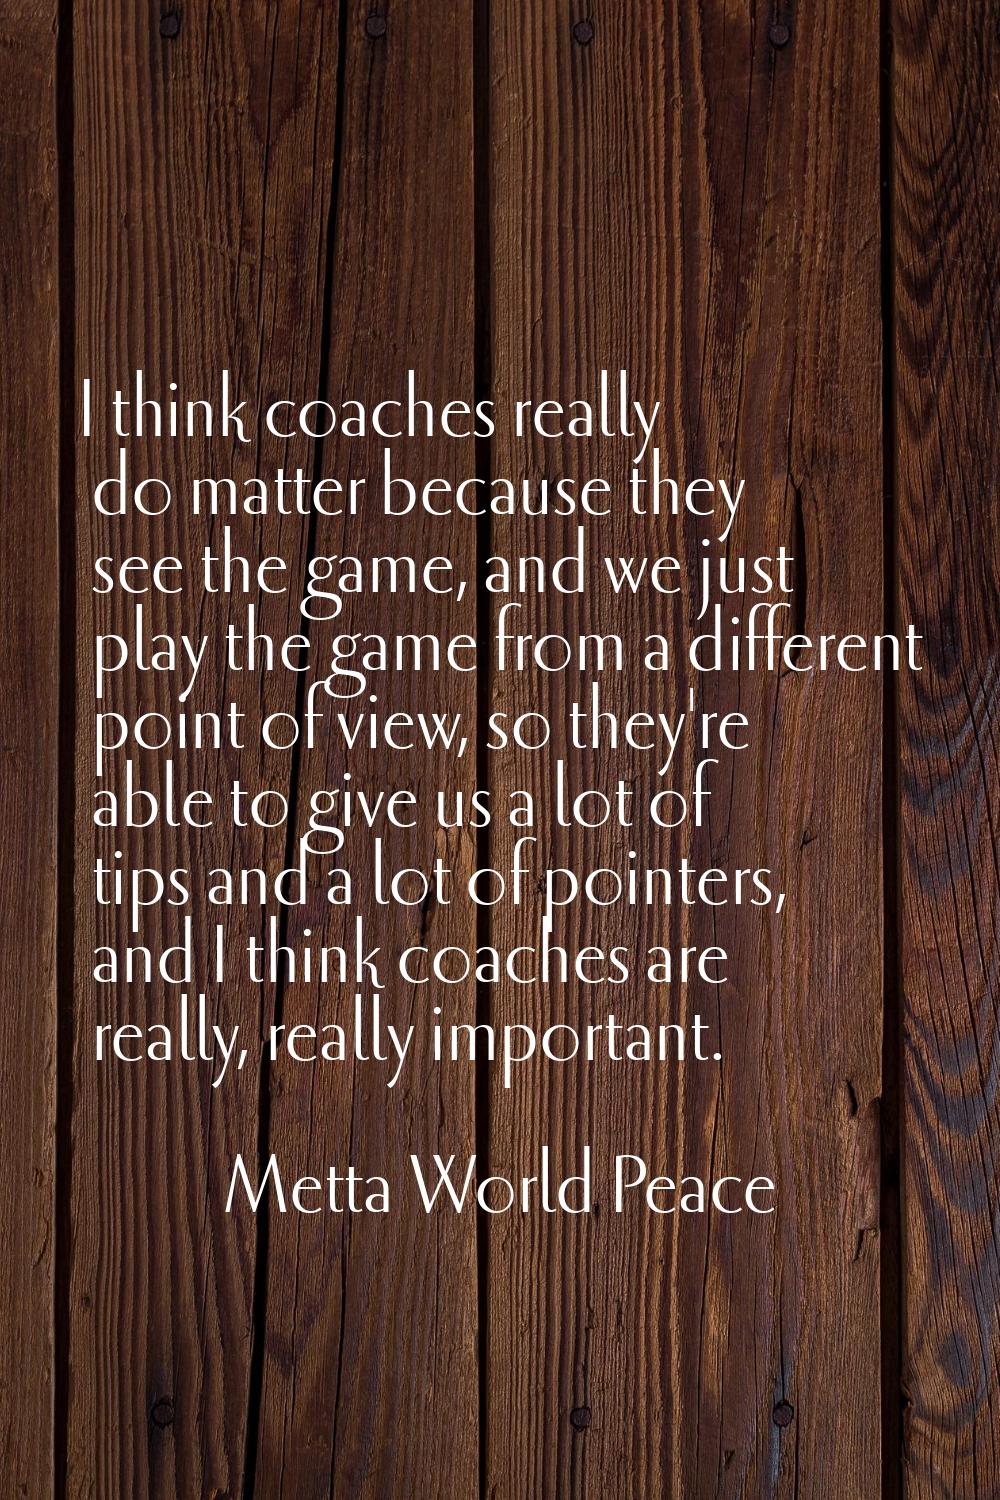 I think coaches really do matter because they see the game, and we just play the game from a differ